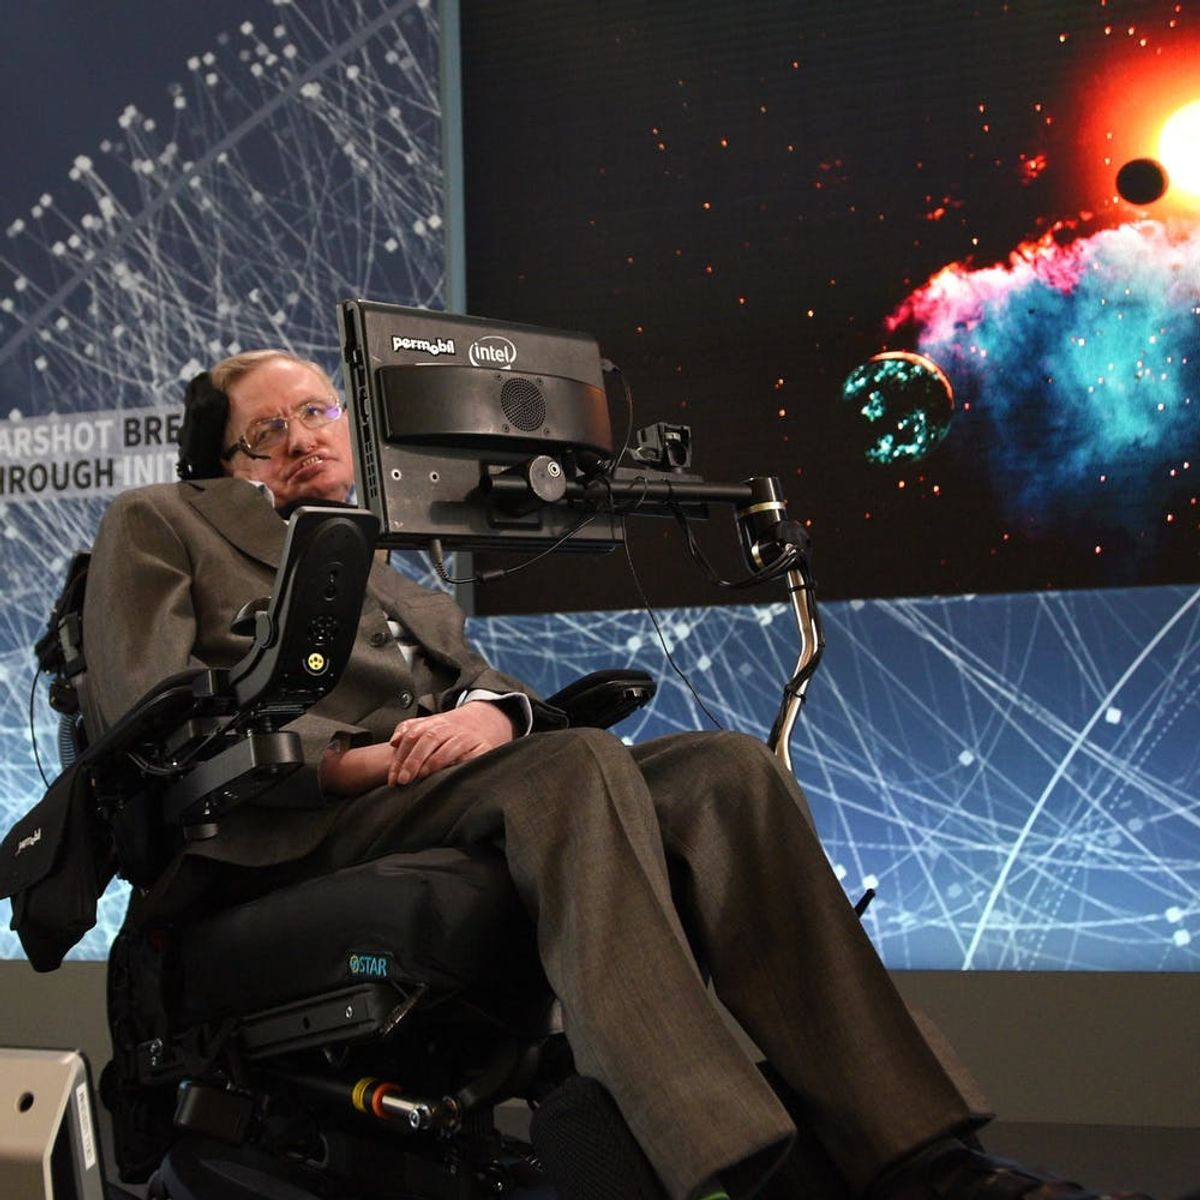 Famed Scientist Stephen Hawking Has Died at Age 76